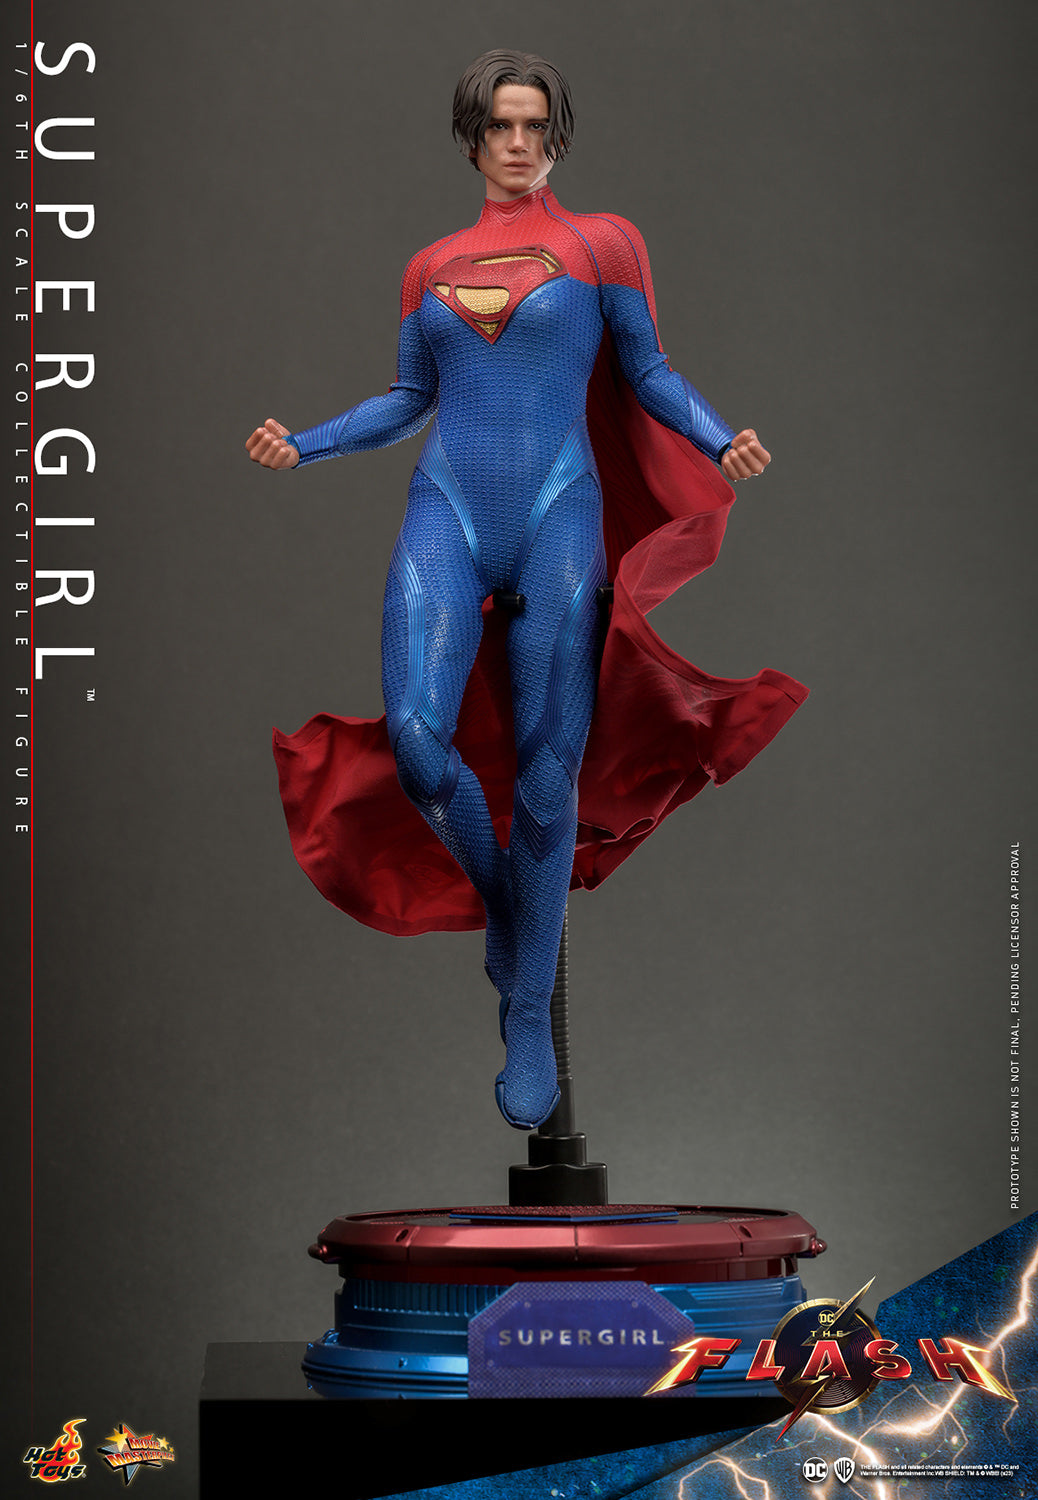 Supergirl Sixth Scale Figure by Hot Toys